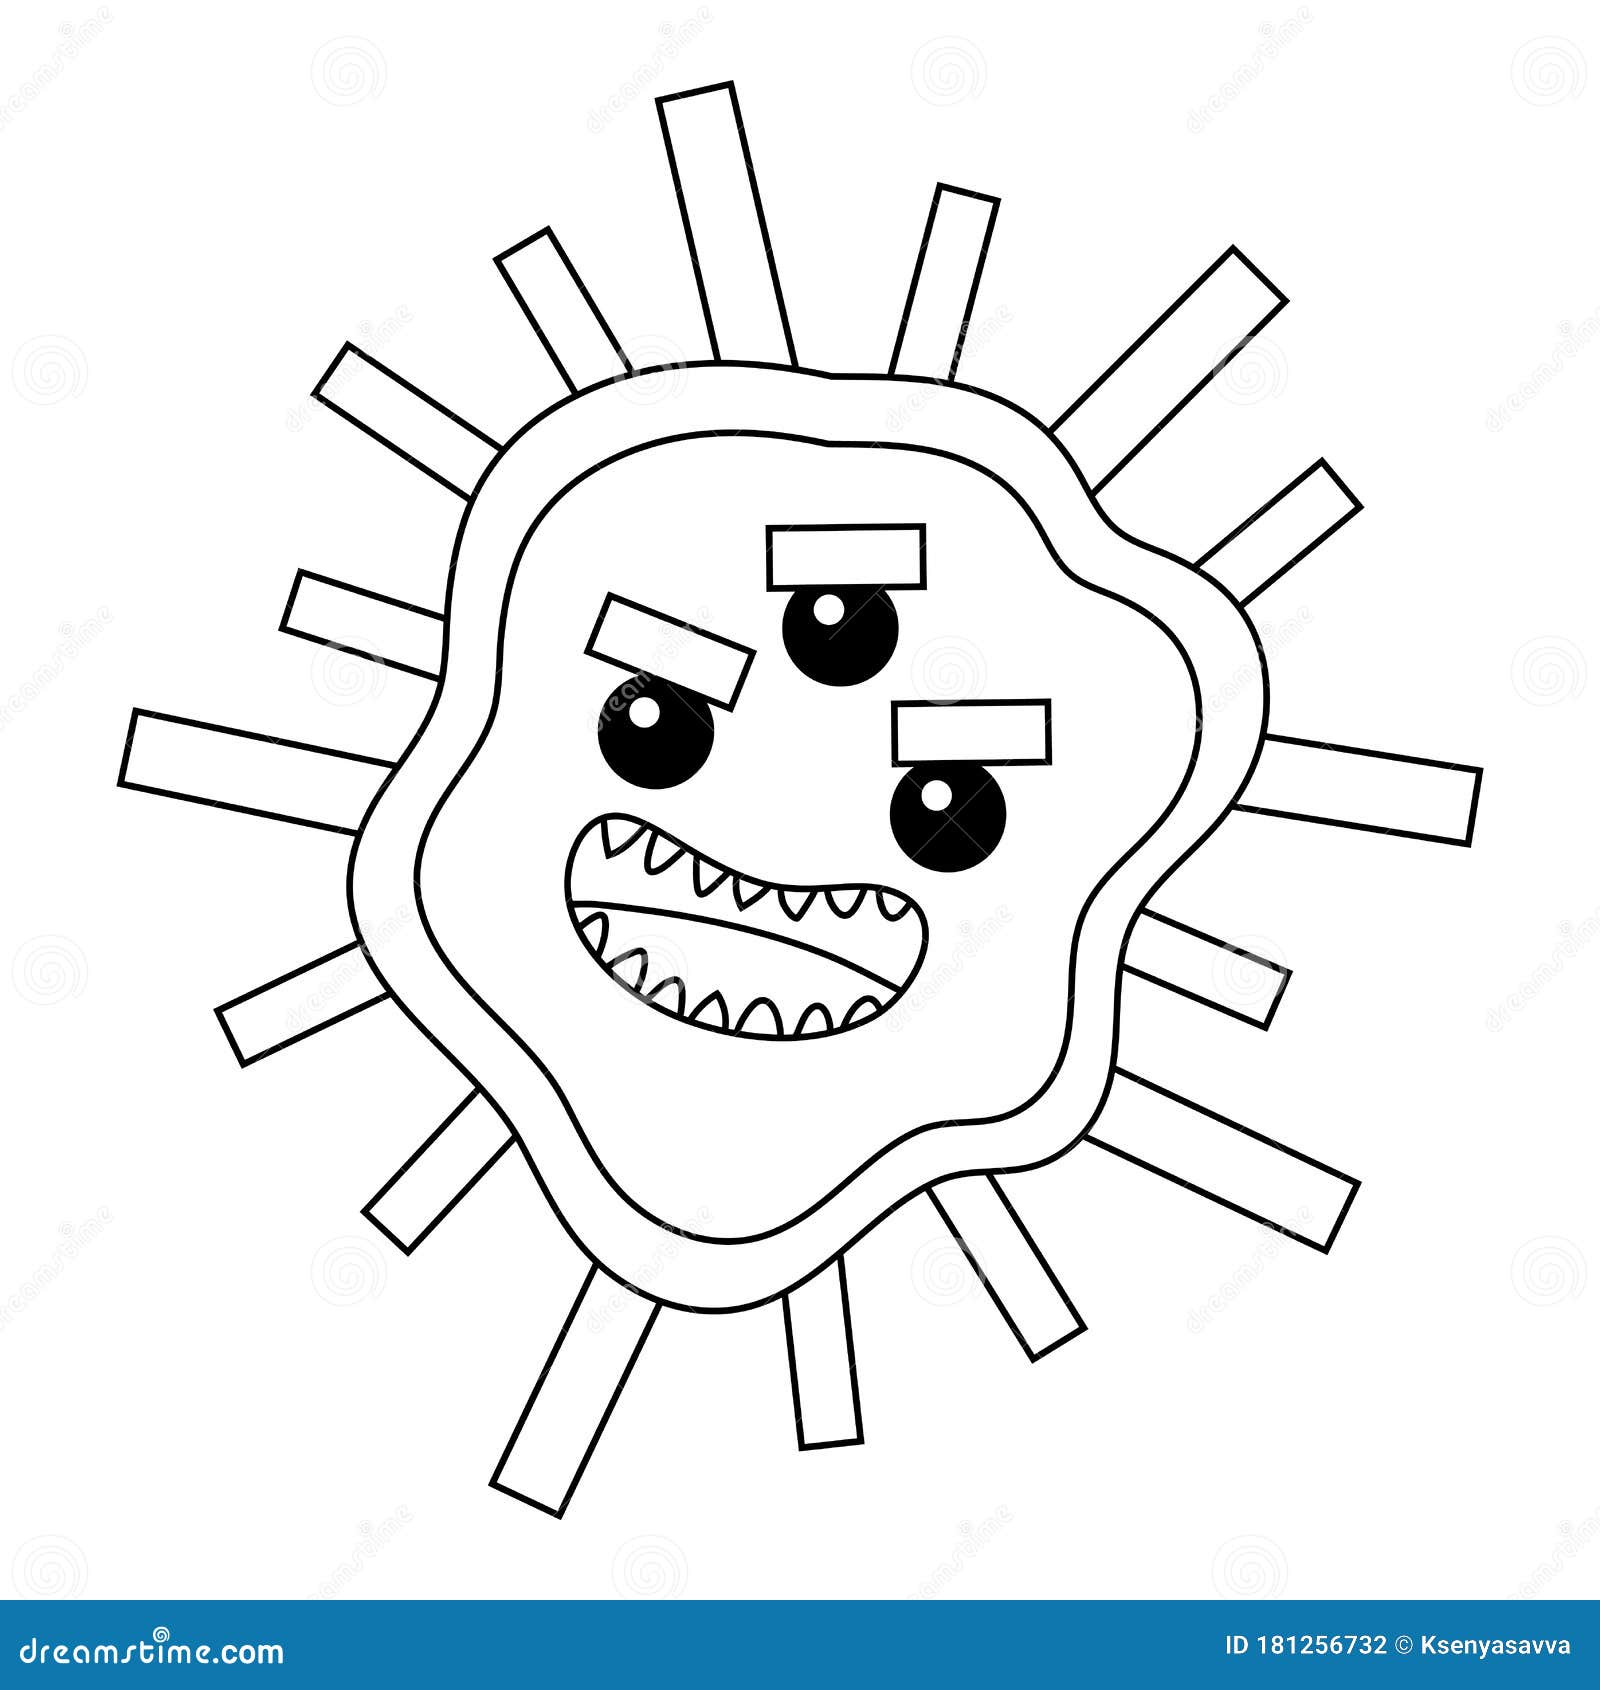 Bacteria Coloring Page Easy Drawing Guides | The Best Porn Website